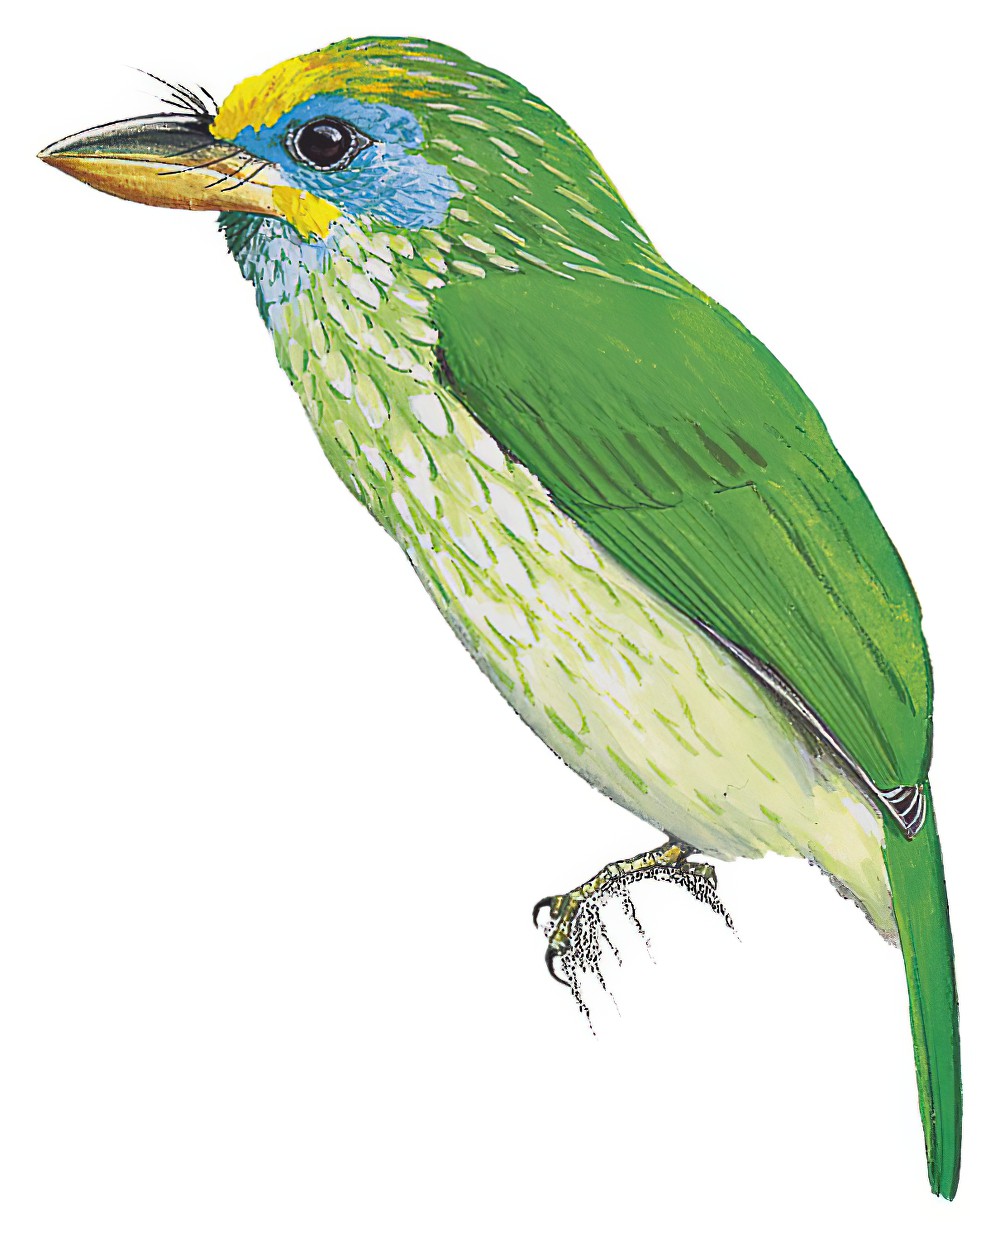 Yellow-fronted Barbet / Psilopogon flavifrons